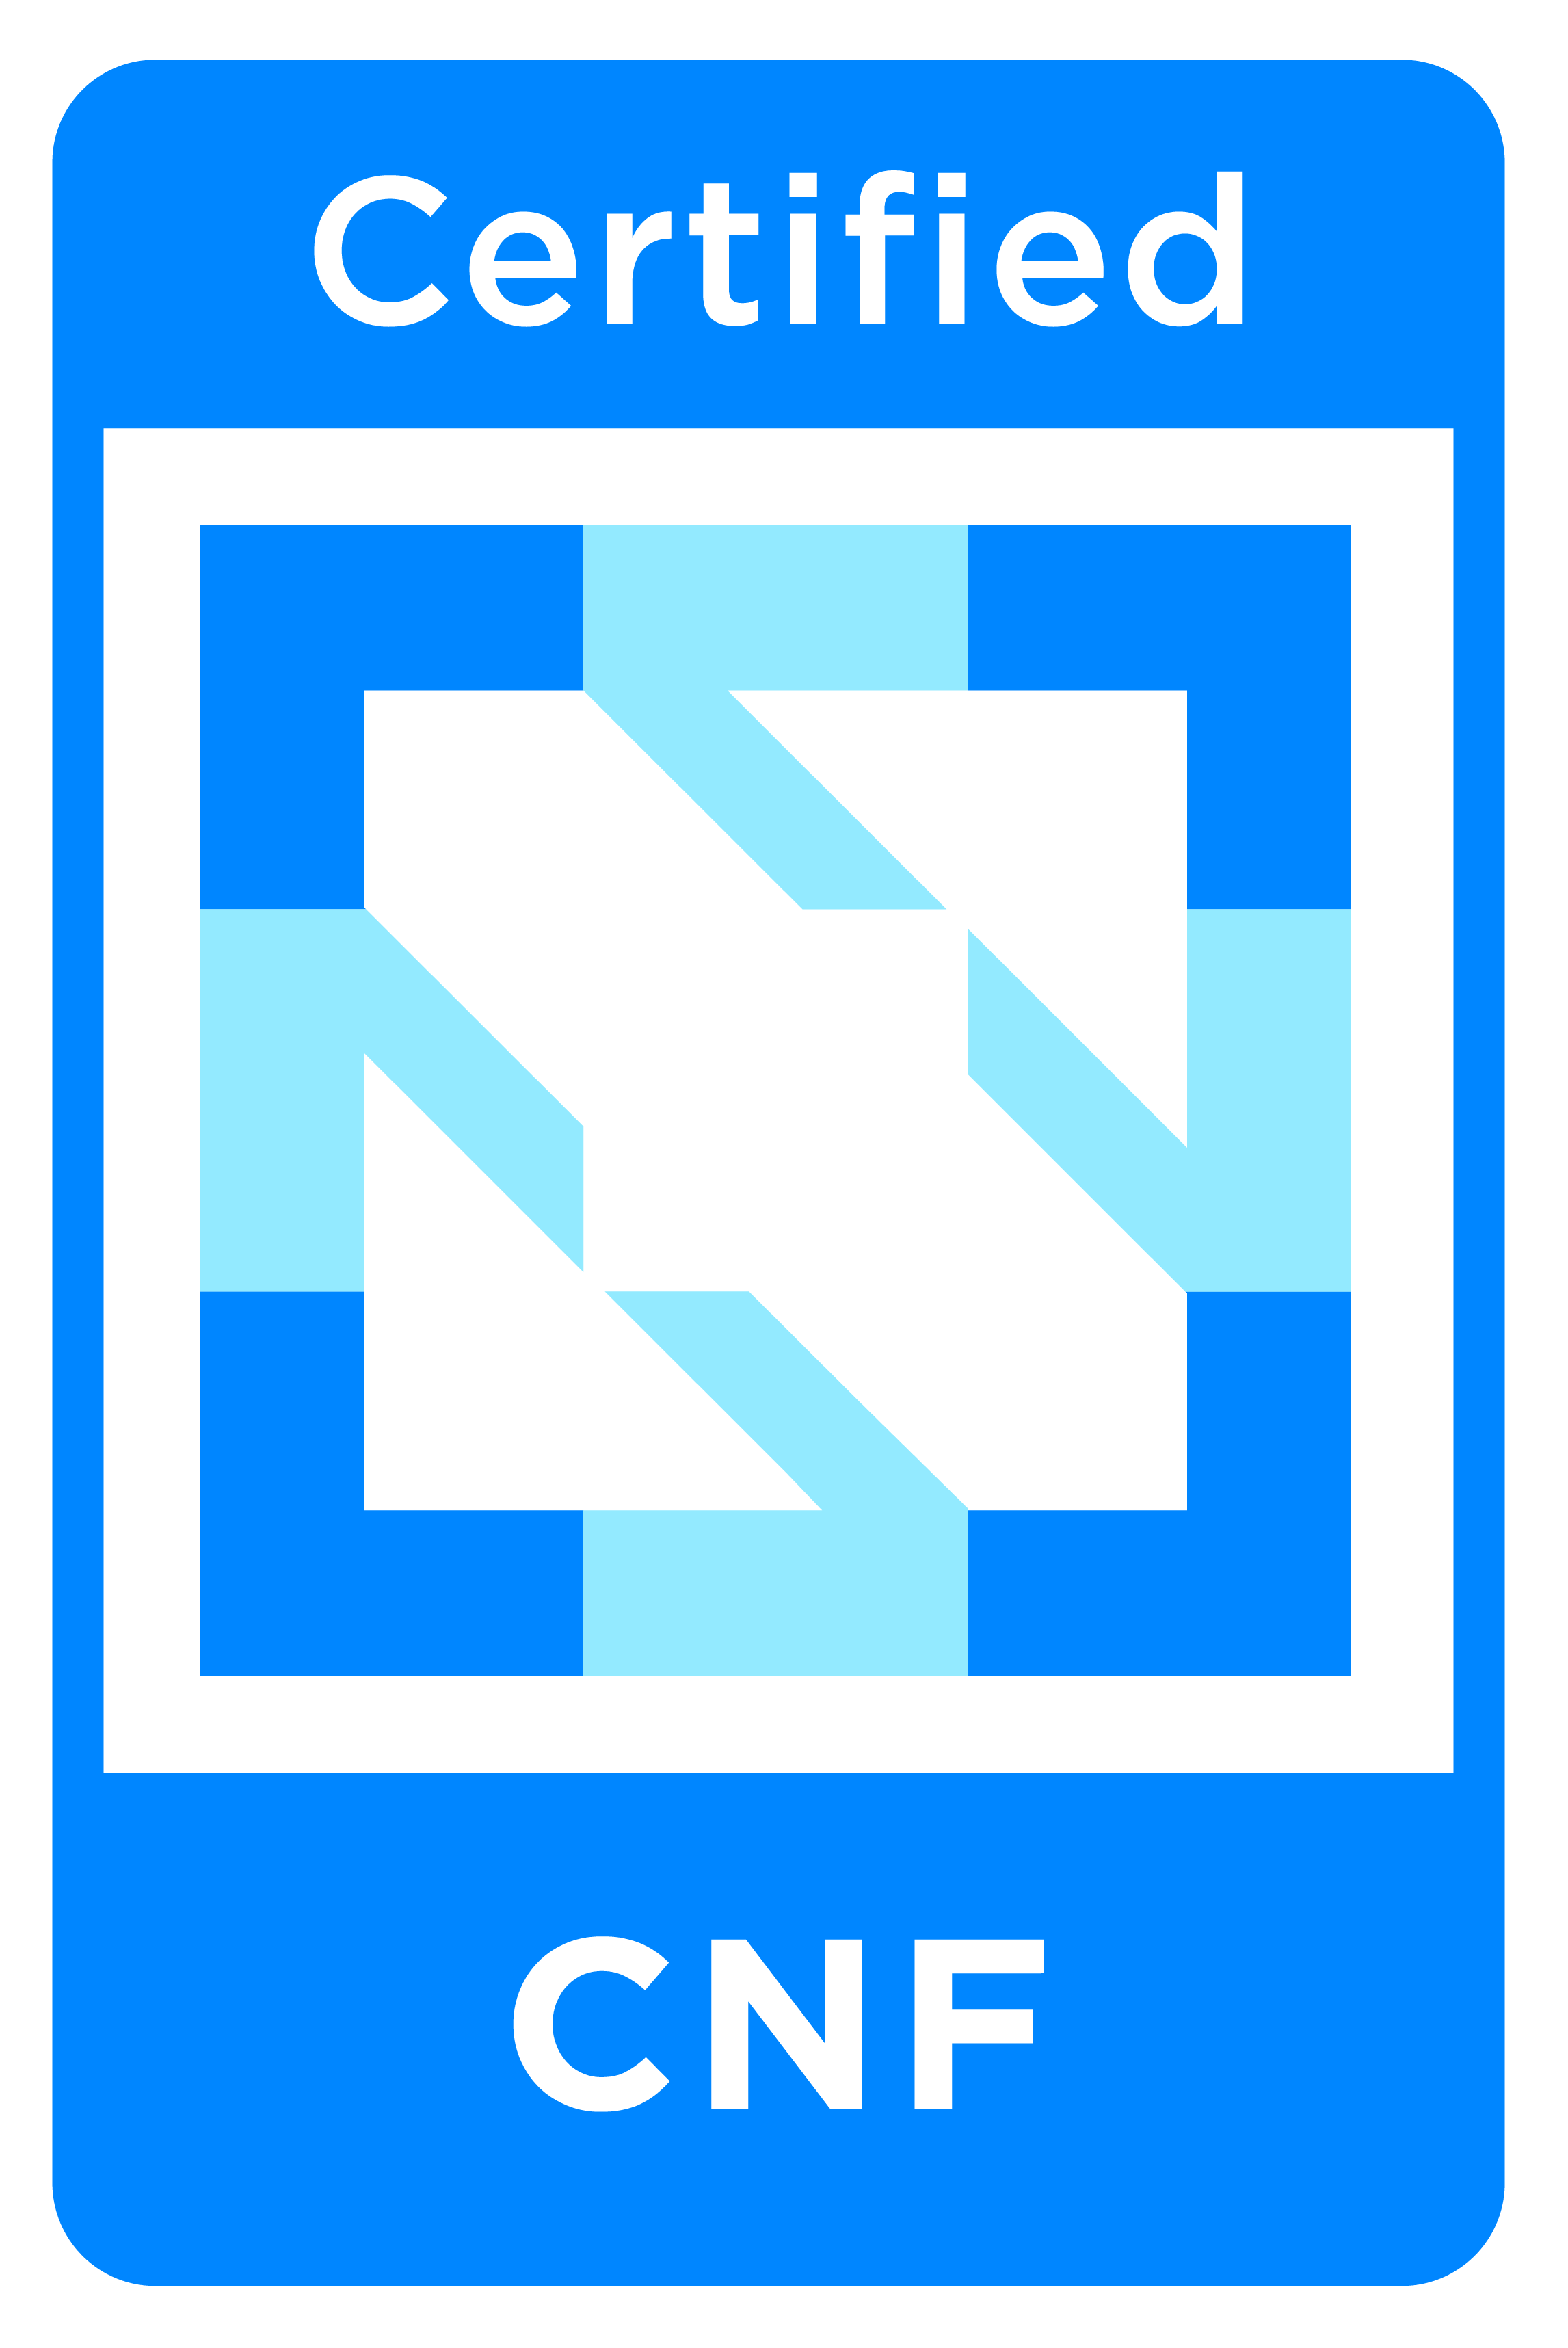 cnf-certified-color.png